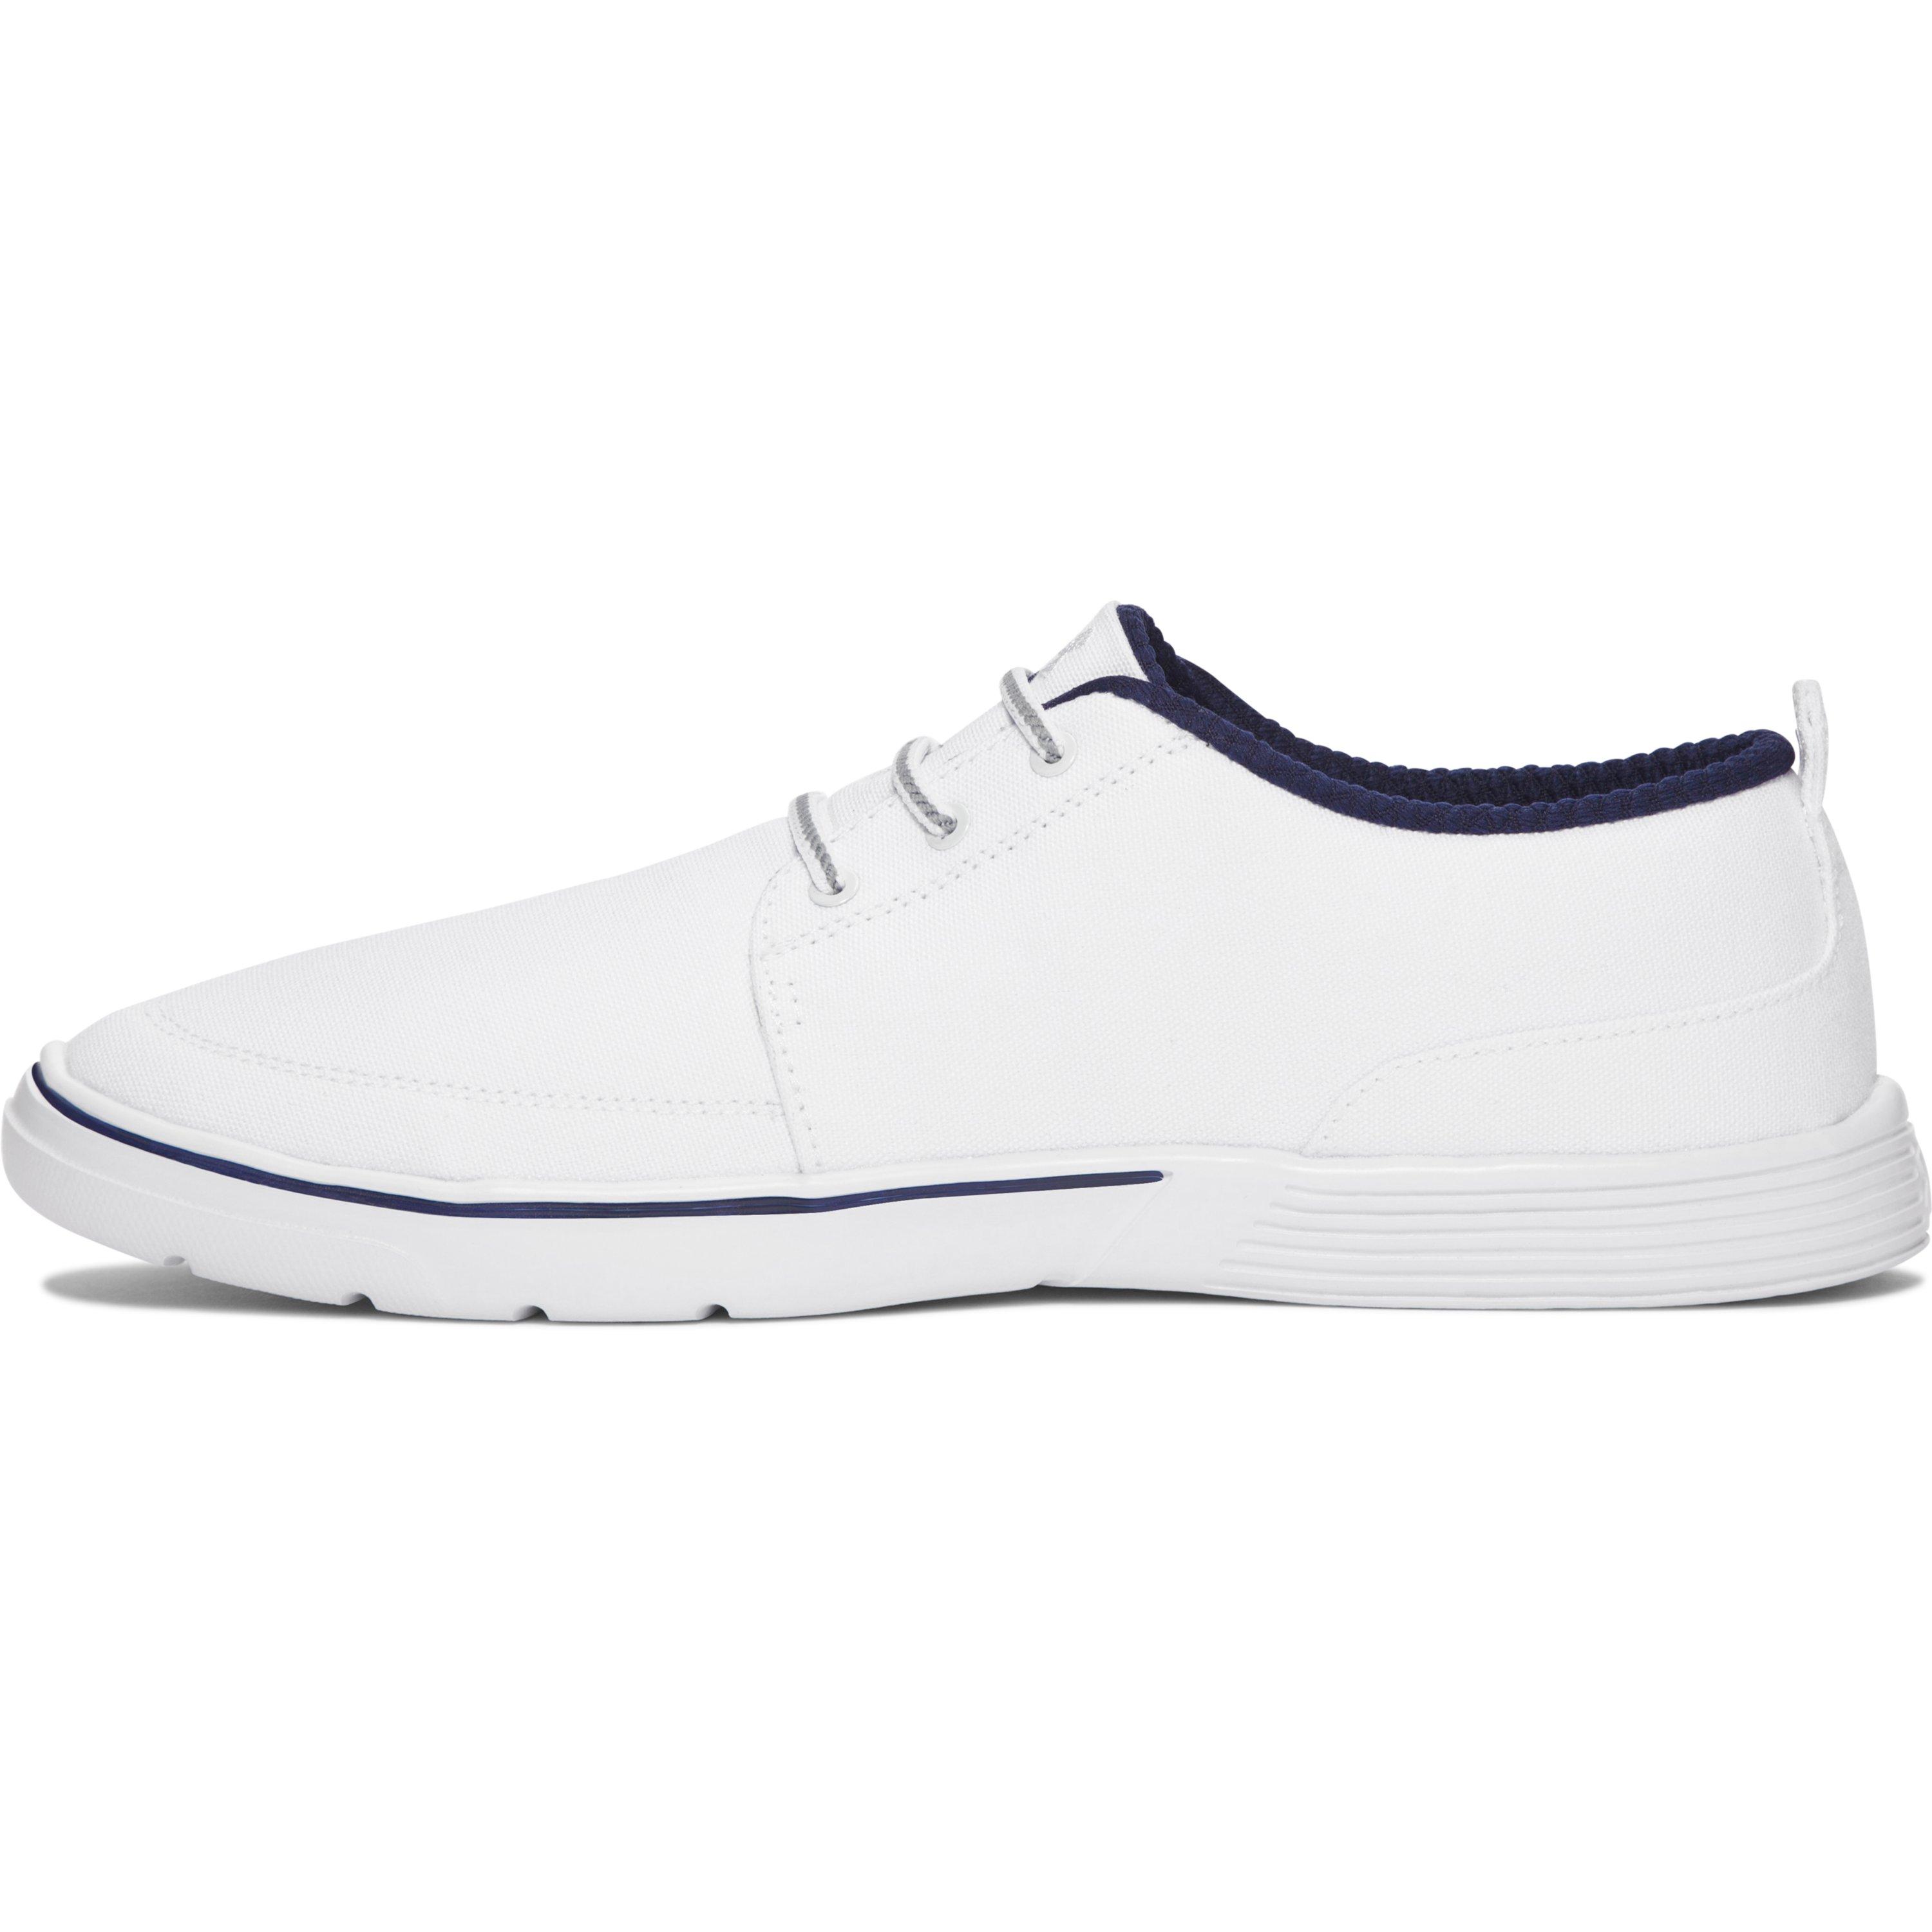 Under Armour Canvas Men's Ua Street Encounter Iii Shoes in White/Midnight  Navy (White) for Men - Lyst